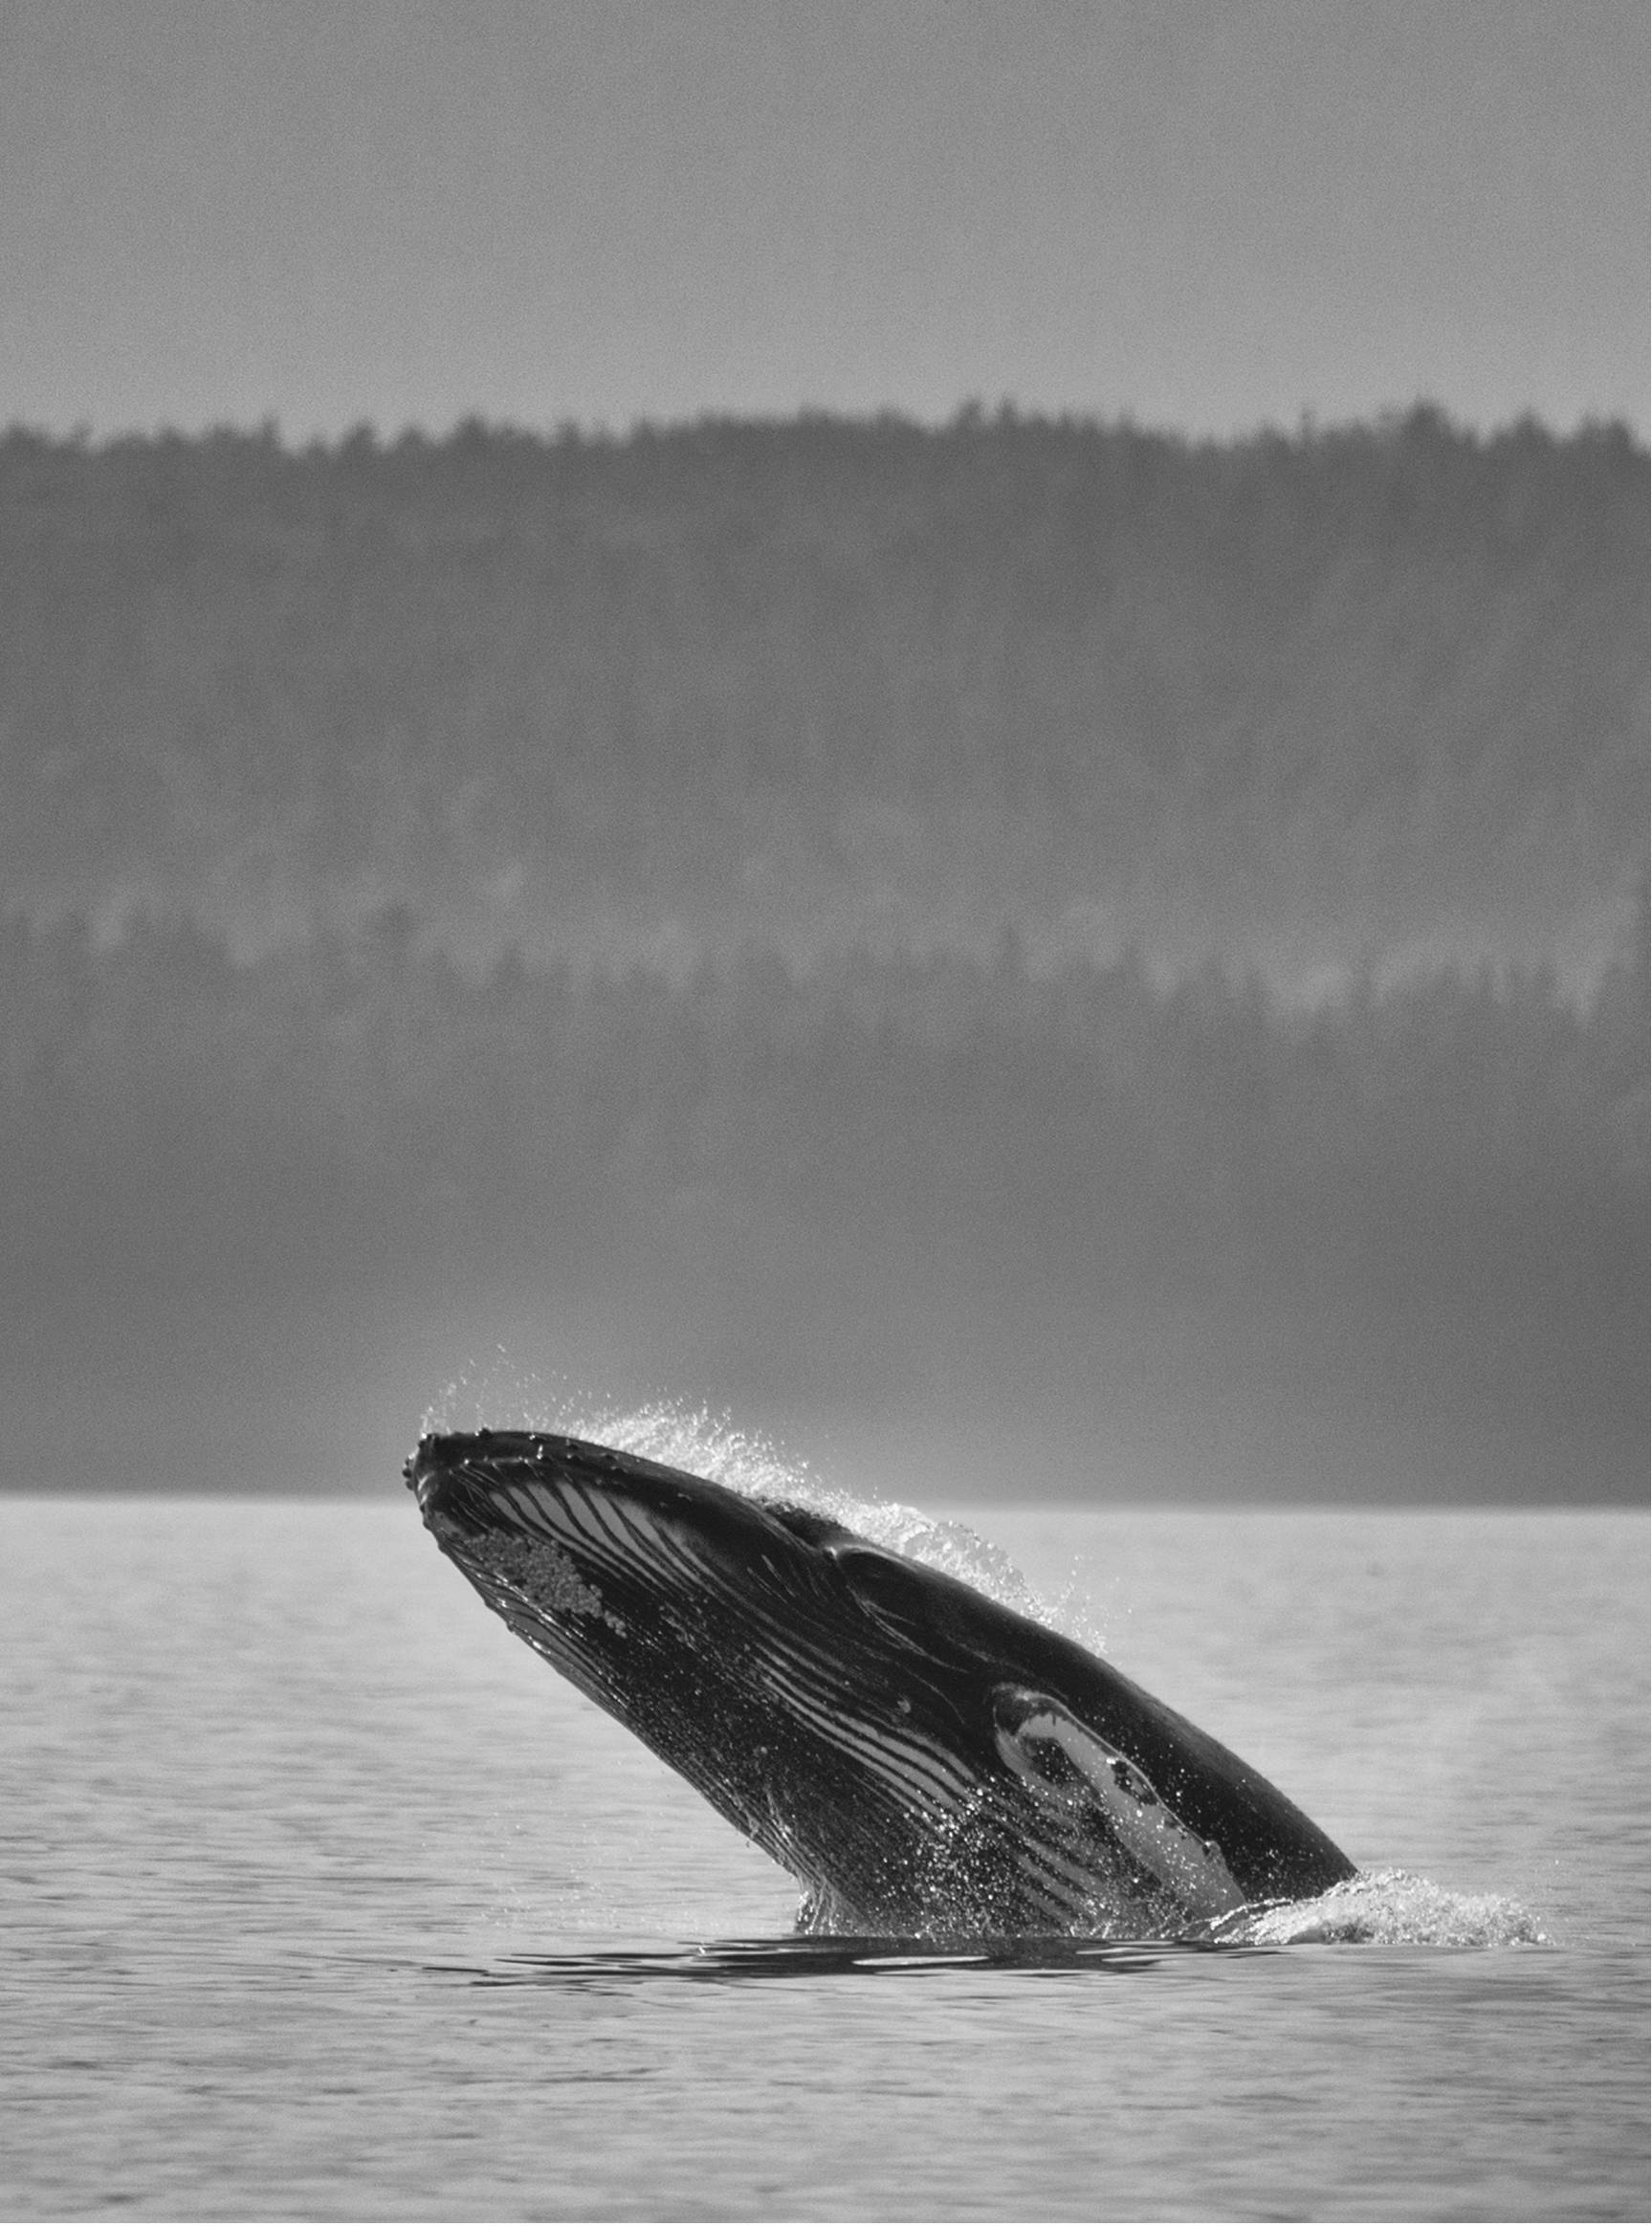 A young humpback whale breaches a quarter-mile from shore off Point Louisa, just outside of Auke Bay, on Saturday, Aug. 31, 2019. (Courtesy Photo | Ken Gill)